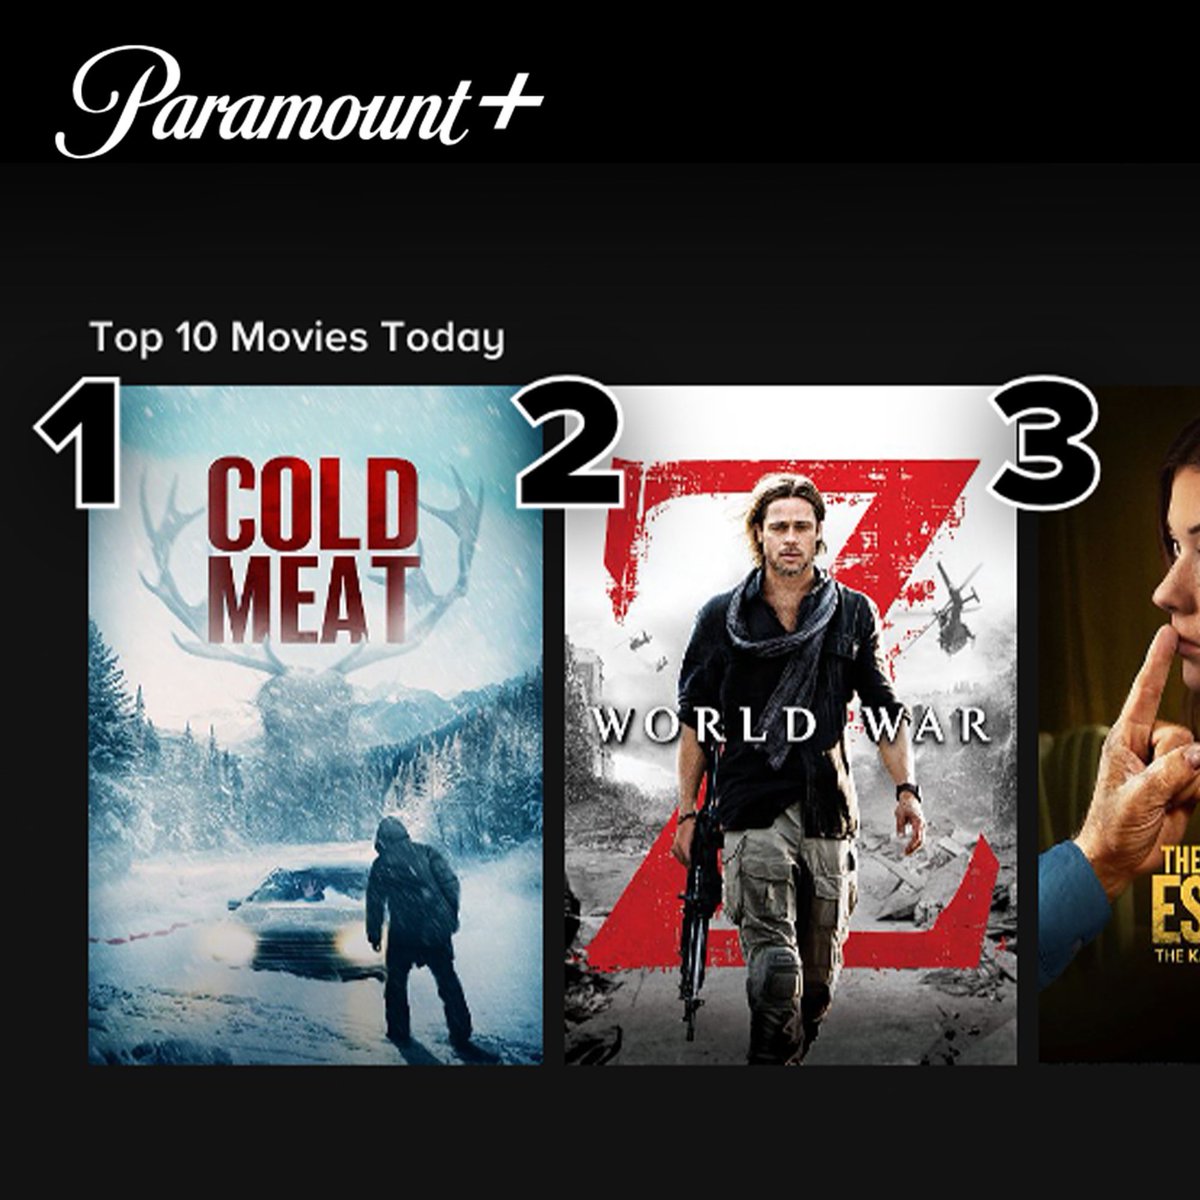 Yeay great news!! I’m here in Canada filming and just learned that my movie “Cold Meat” went straight to #1 today!! It’s my birthday gift for tomorrow I’ll be celebrating my birthday on set shooting🥳🎬🎂🎭 Big congrats 🥳@therealleech @YanTual @FeaturisticG   @paramountplus